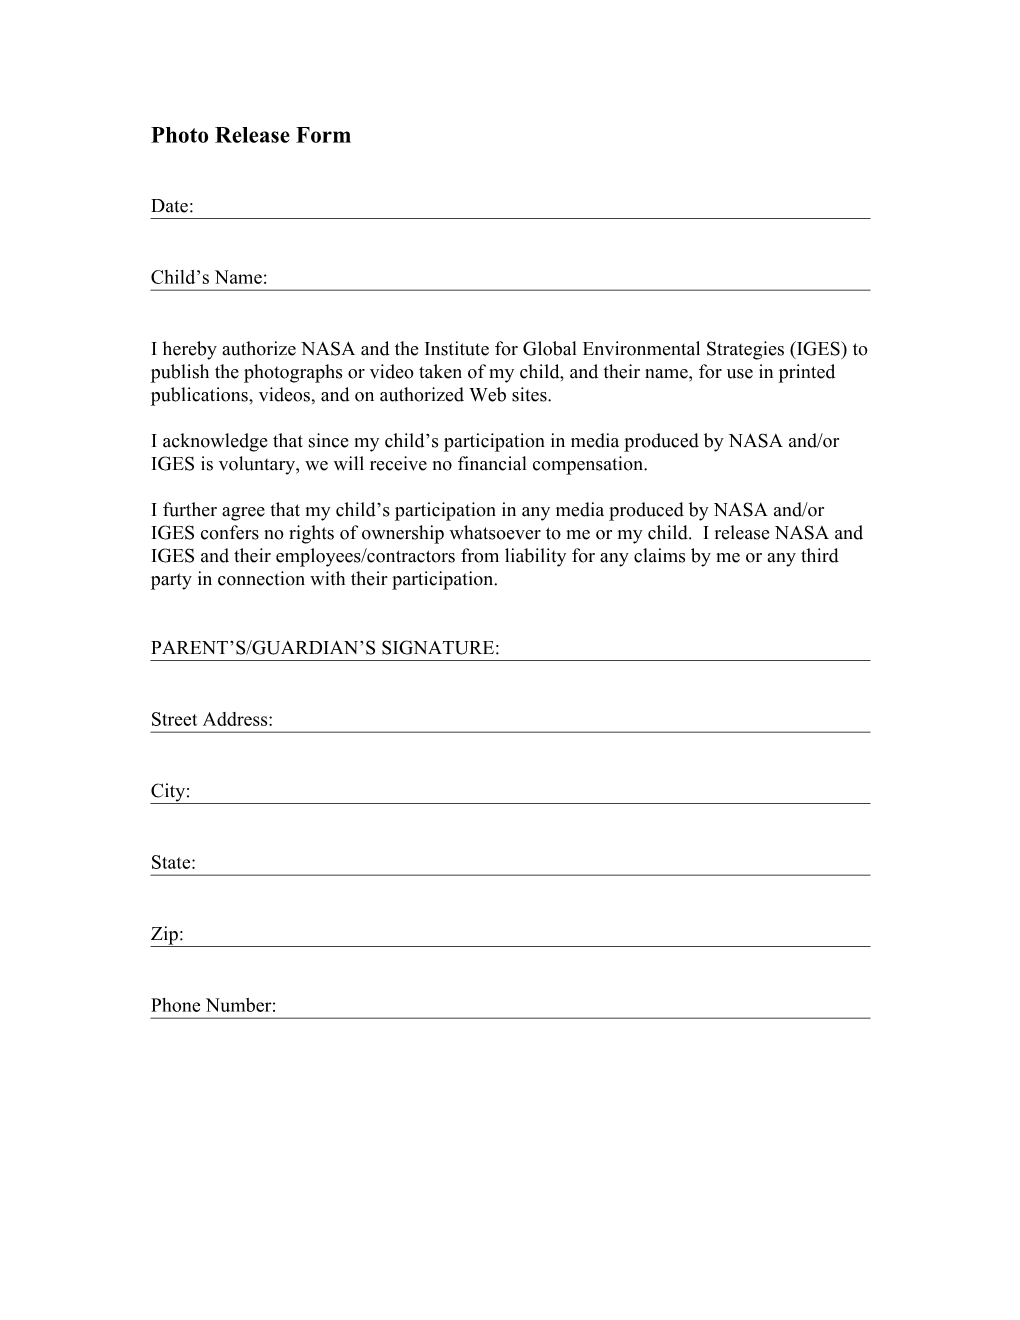 Student Photo Release Form